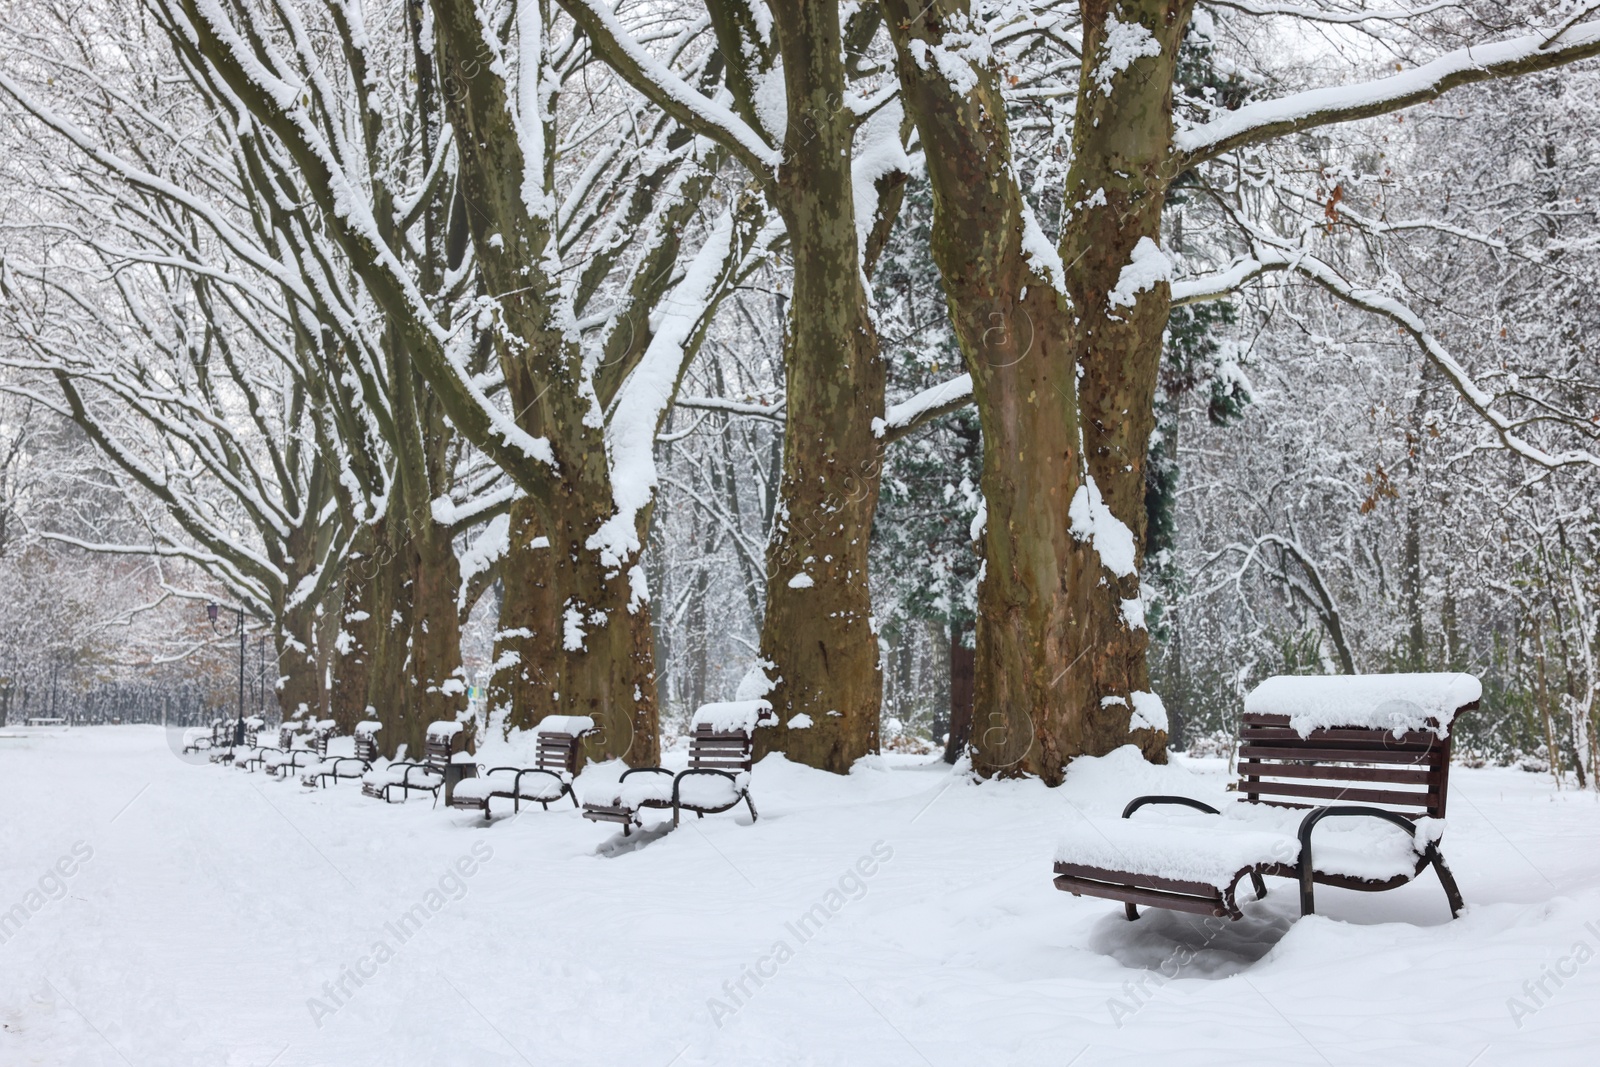 Photo of Benches covered with snow and trees in winter park